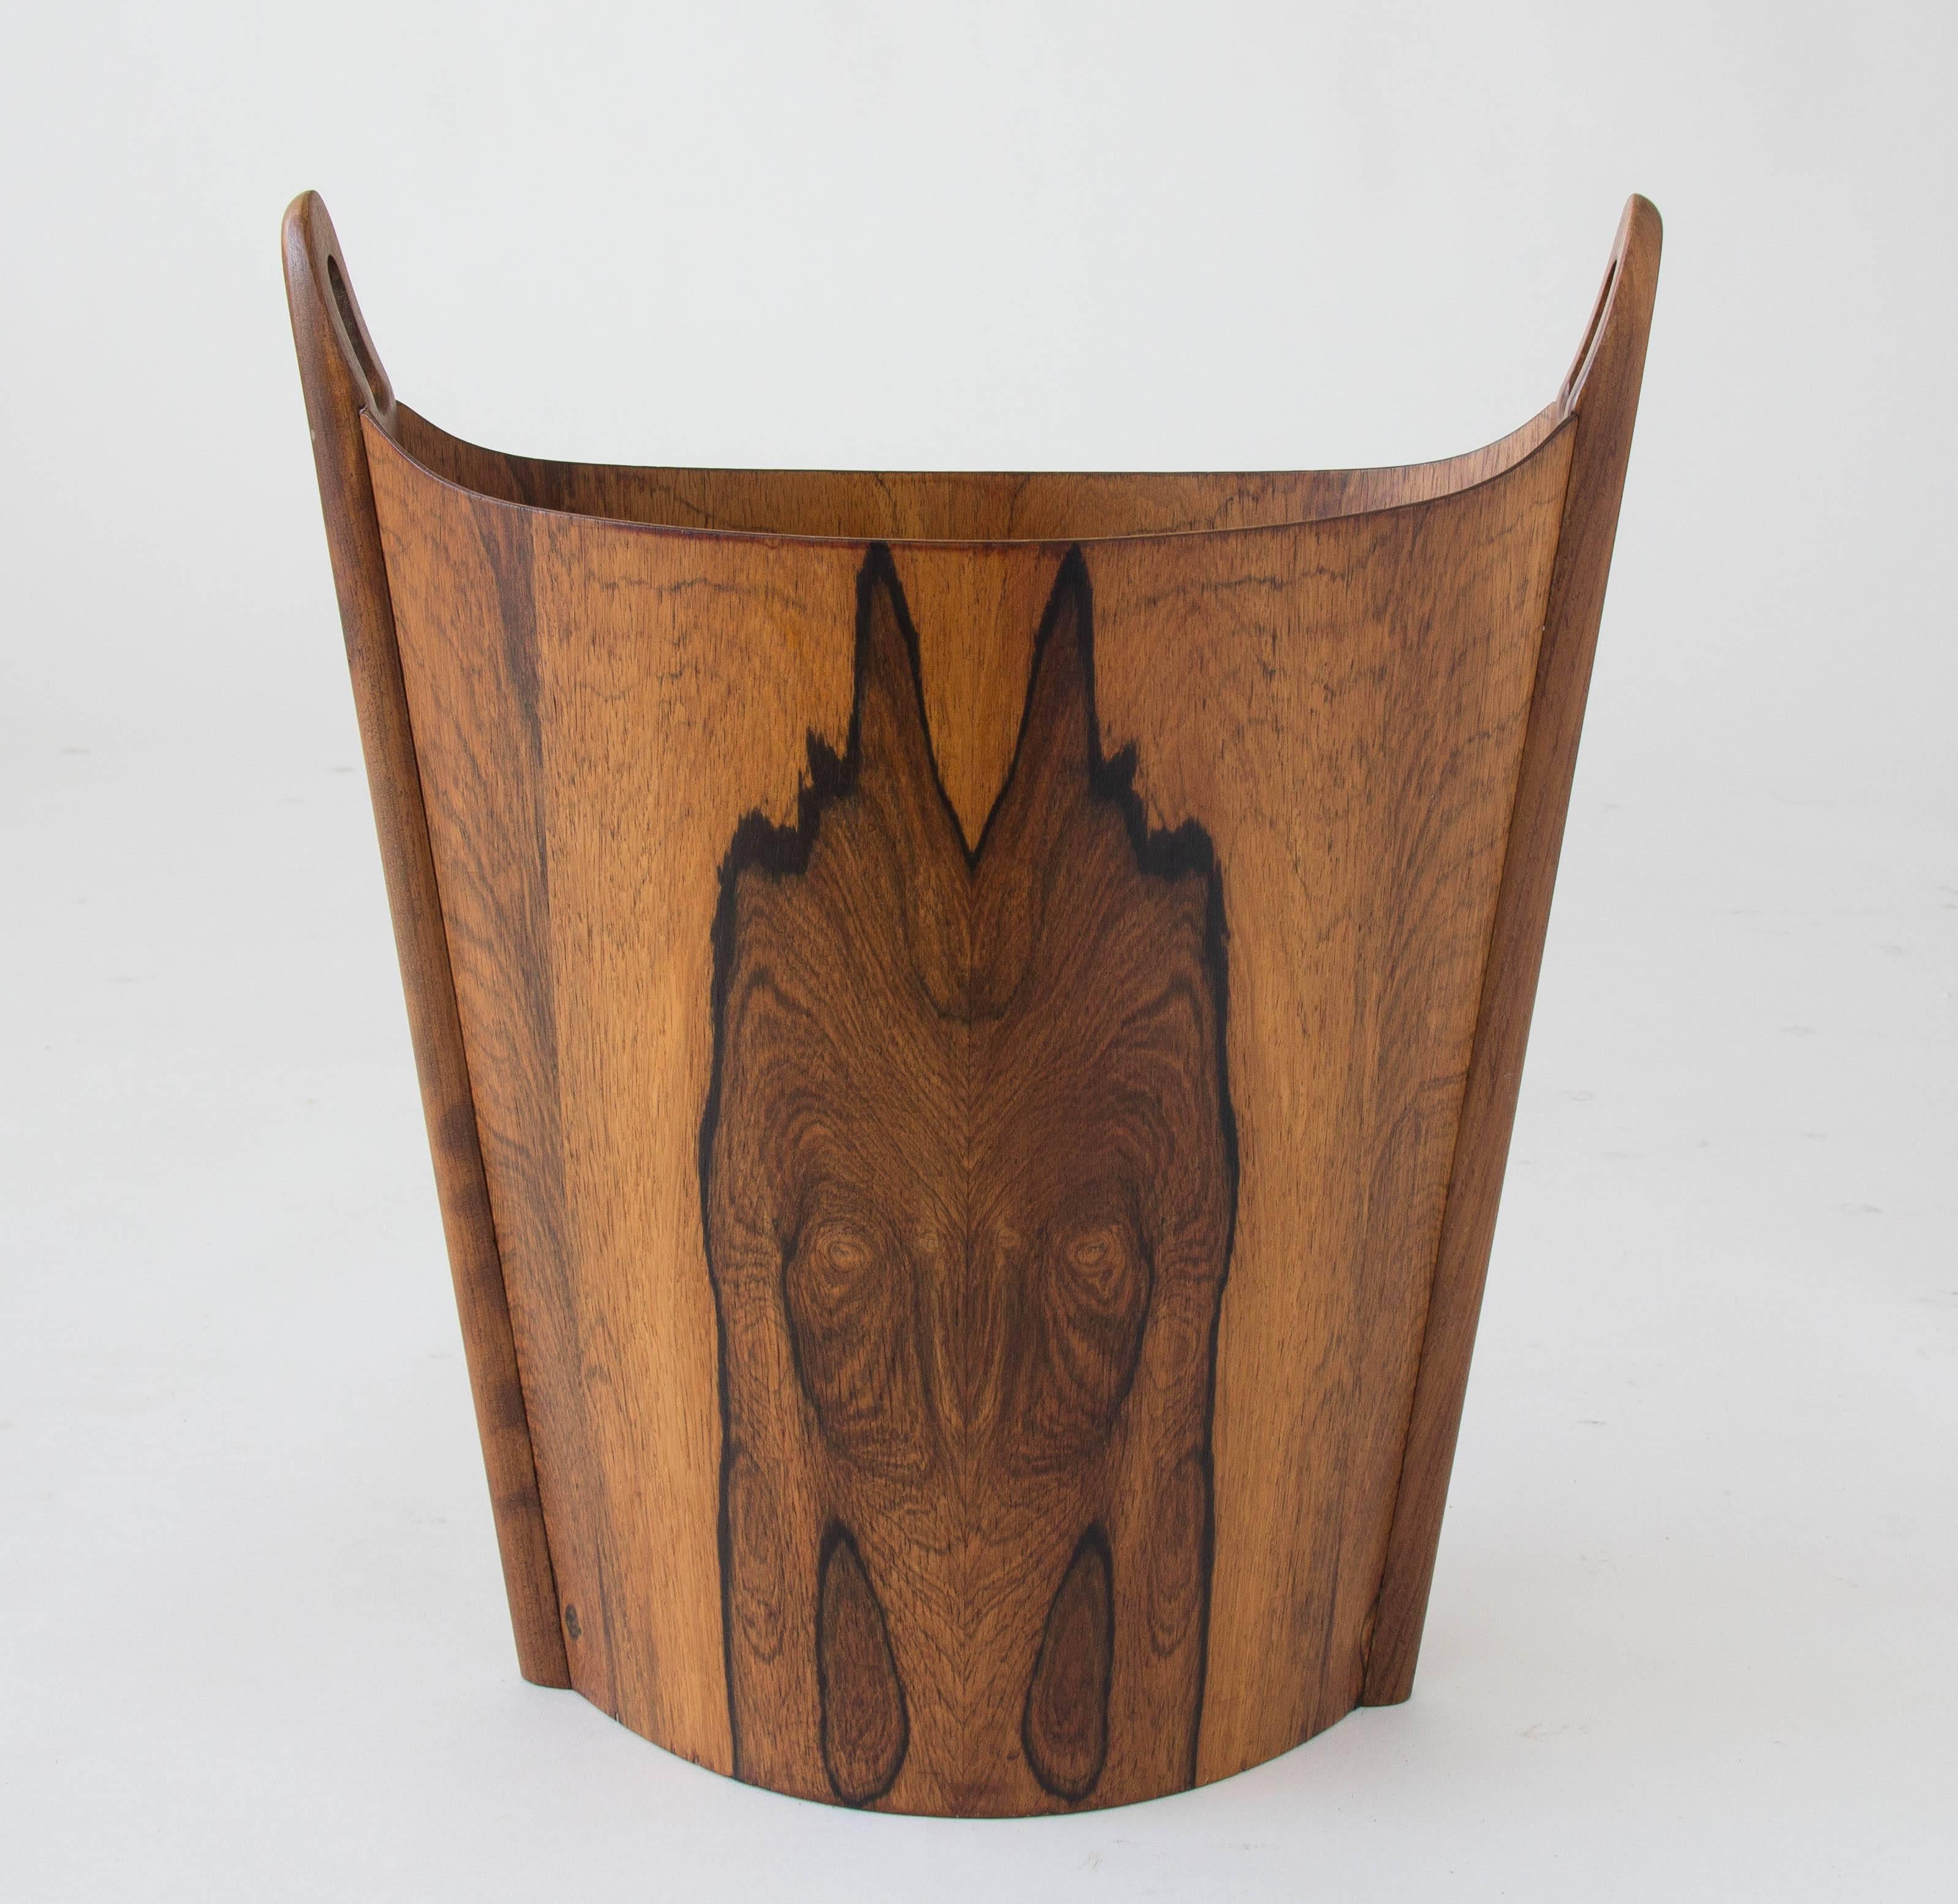 A wastebasket with delicate construction in highly figured rosewood, designed and produced in Norway by Einar Barnes for P.S. Heggen. The oblong vessel has a ridge at either end of solid rosewood with a round, integrated handle. 

Condition: